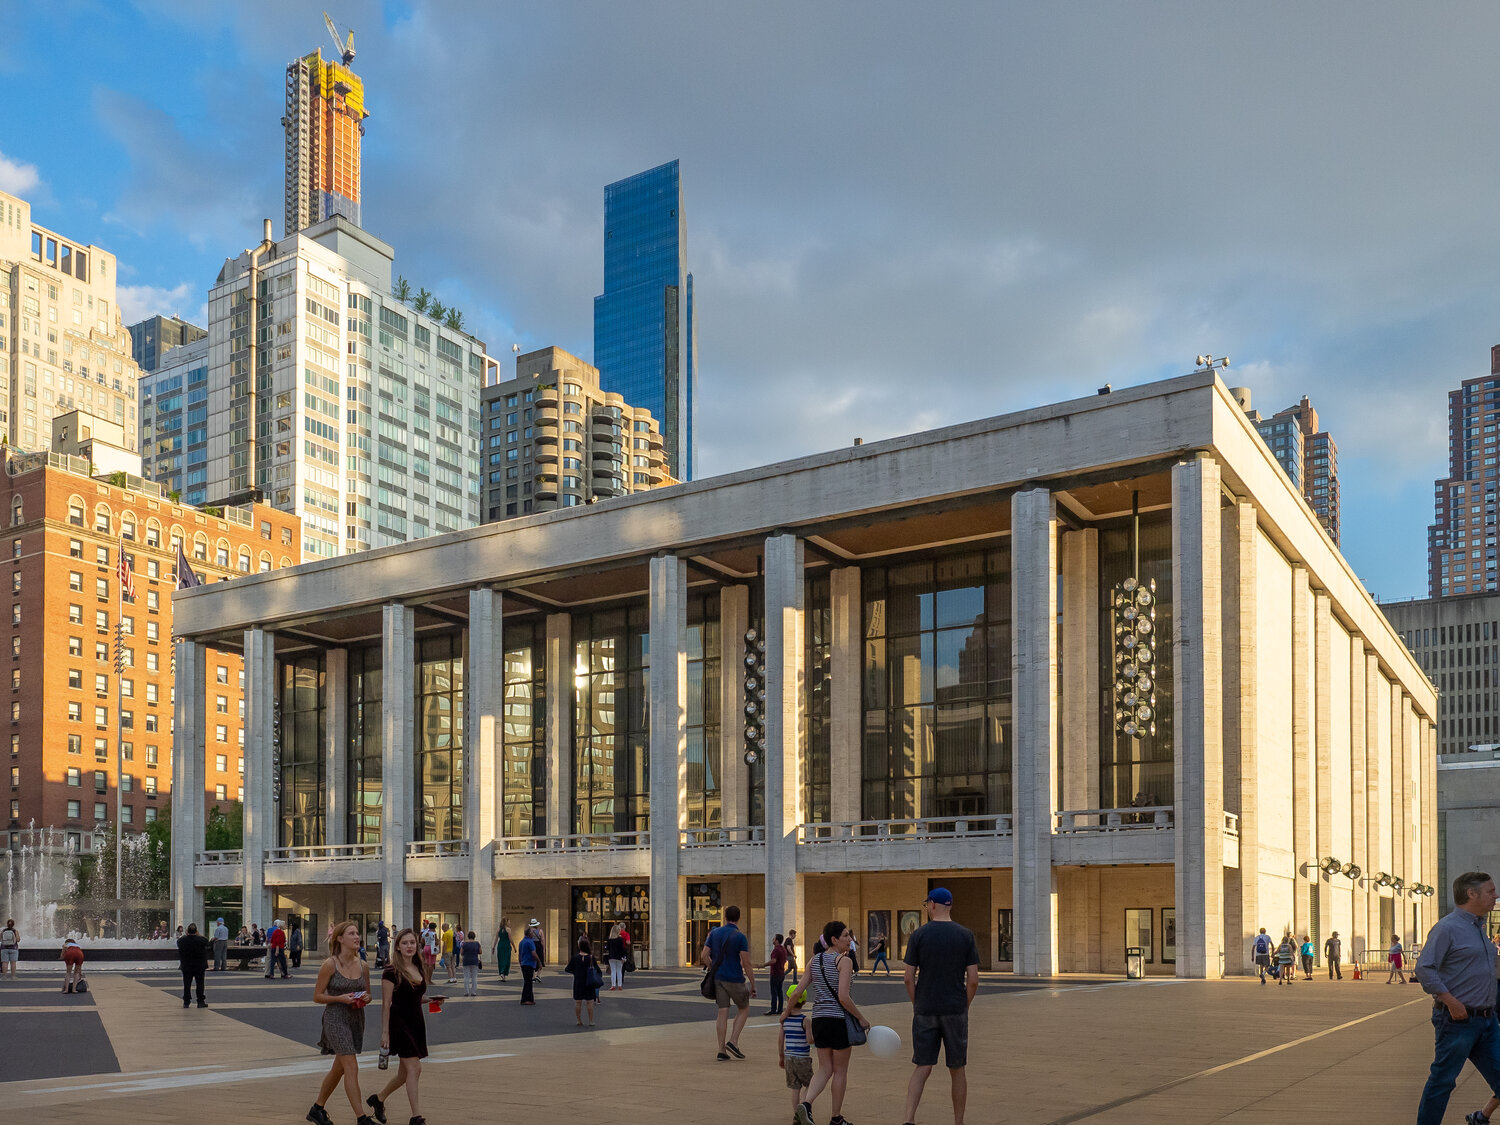 The New York City Ballet calls Lincoln Center home. Its orchestra and the world-renowned dance company are at odds regarding a new contract. The musicians early this month overwhelmingly approved a strike vote. City Ballet management, though, is hopeful of a resolution.